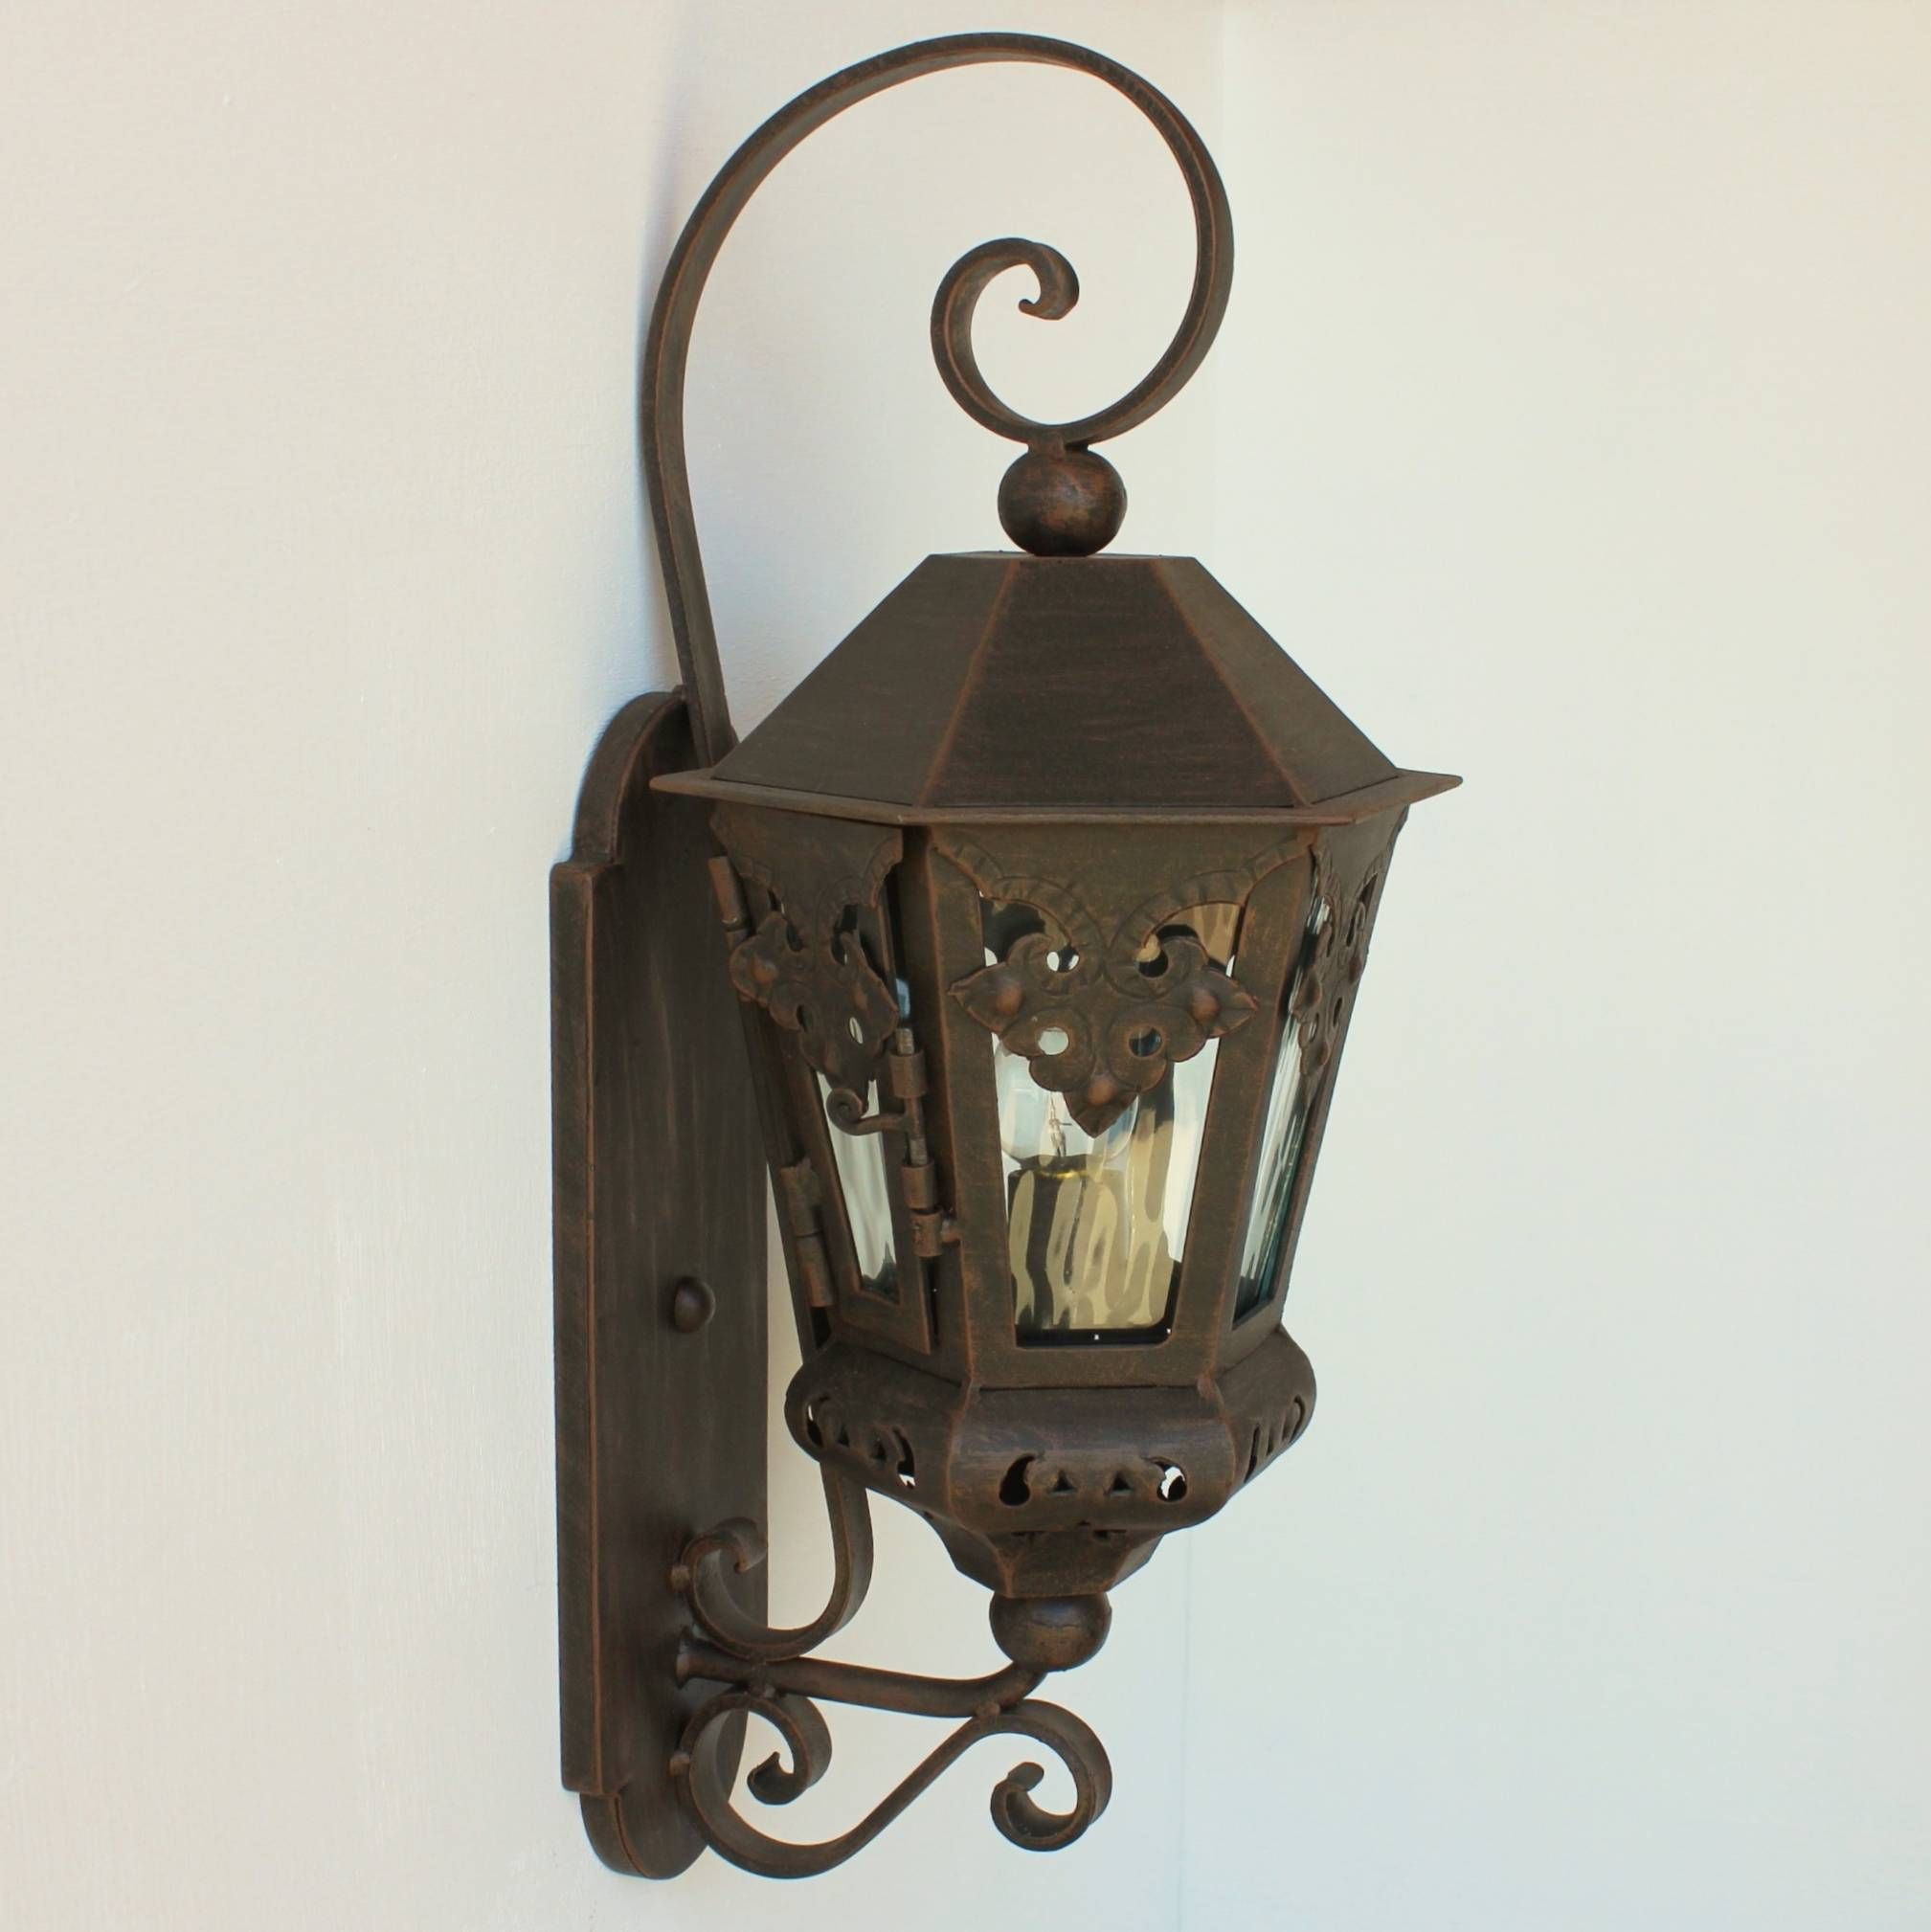 Home Design : Punched Tin Lamp Shadespark Designs Rustic In Punched Tin Lighting Fixtures (View 7 of 15)